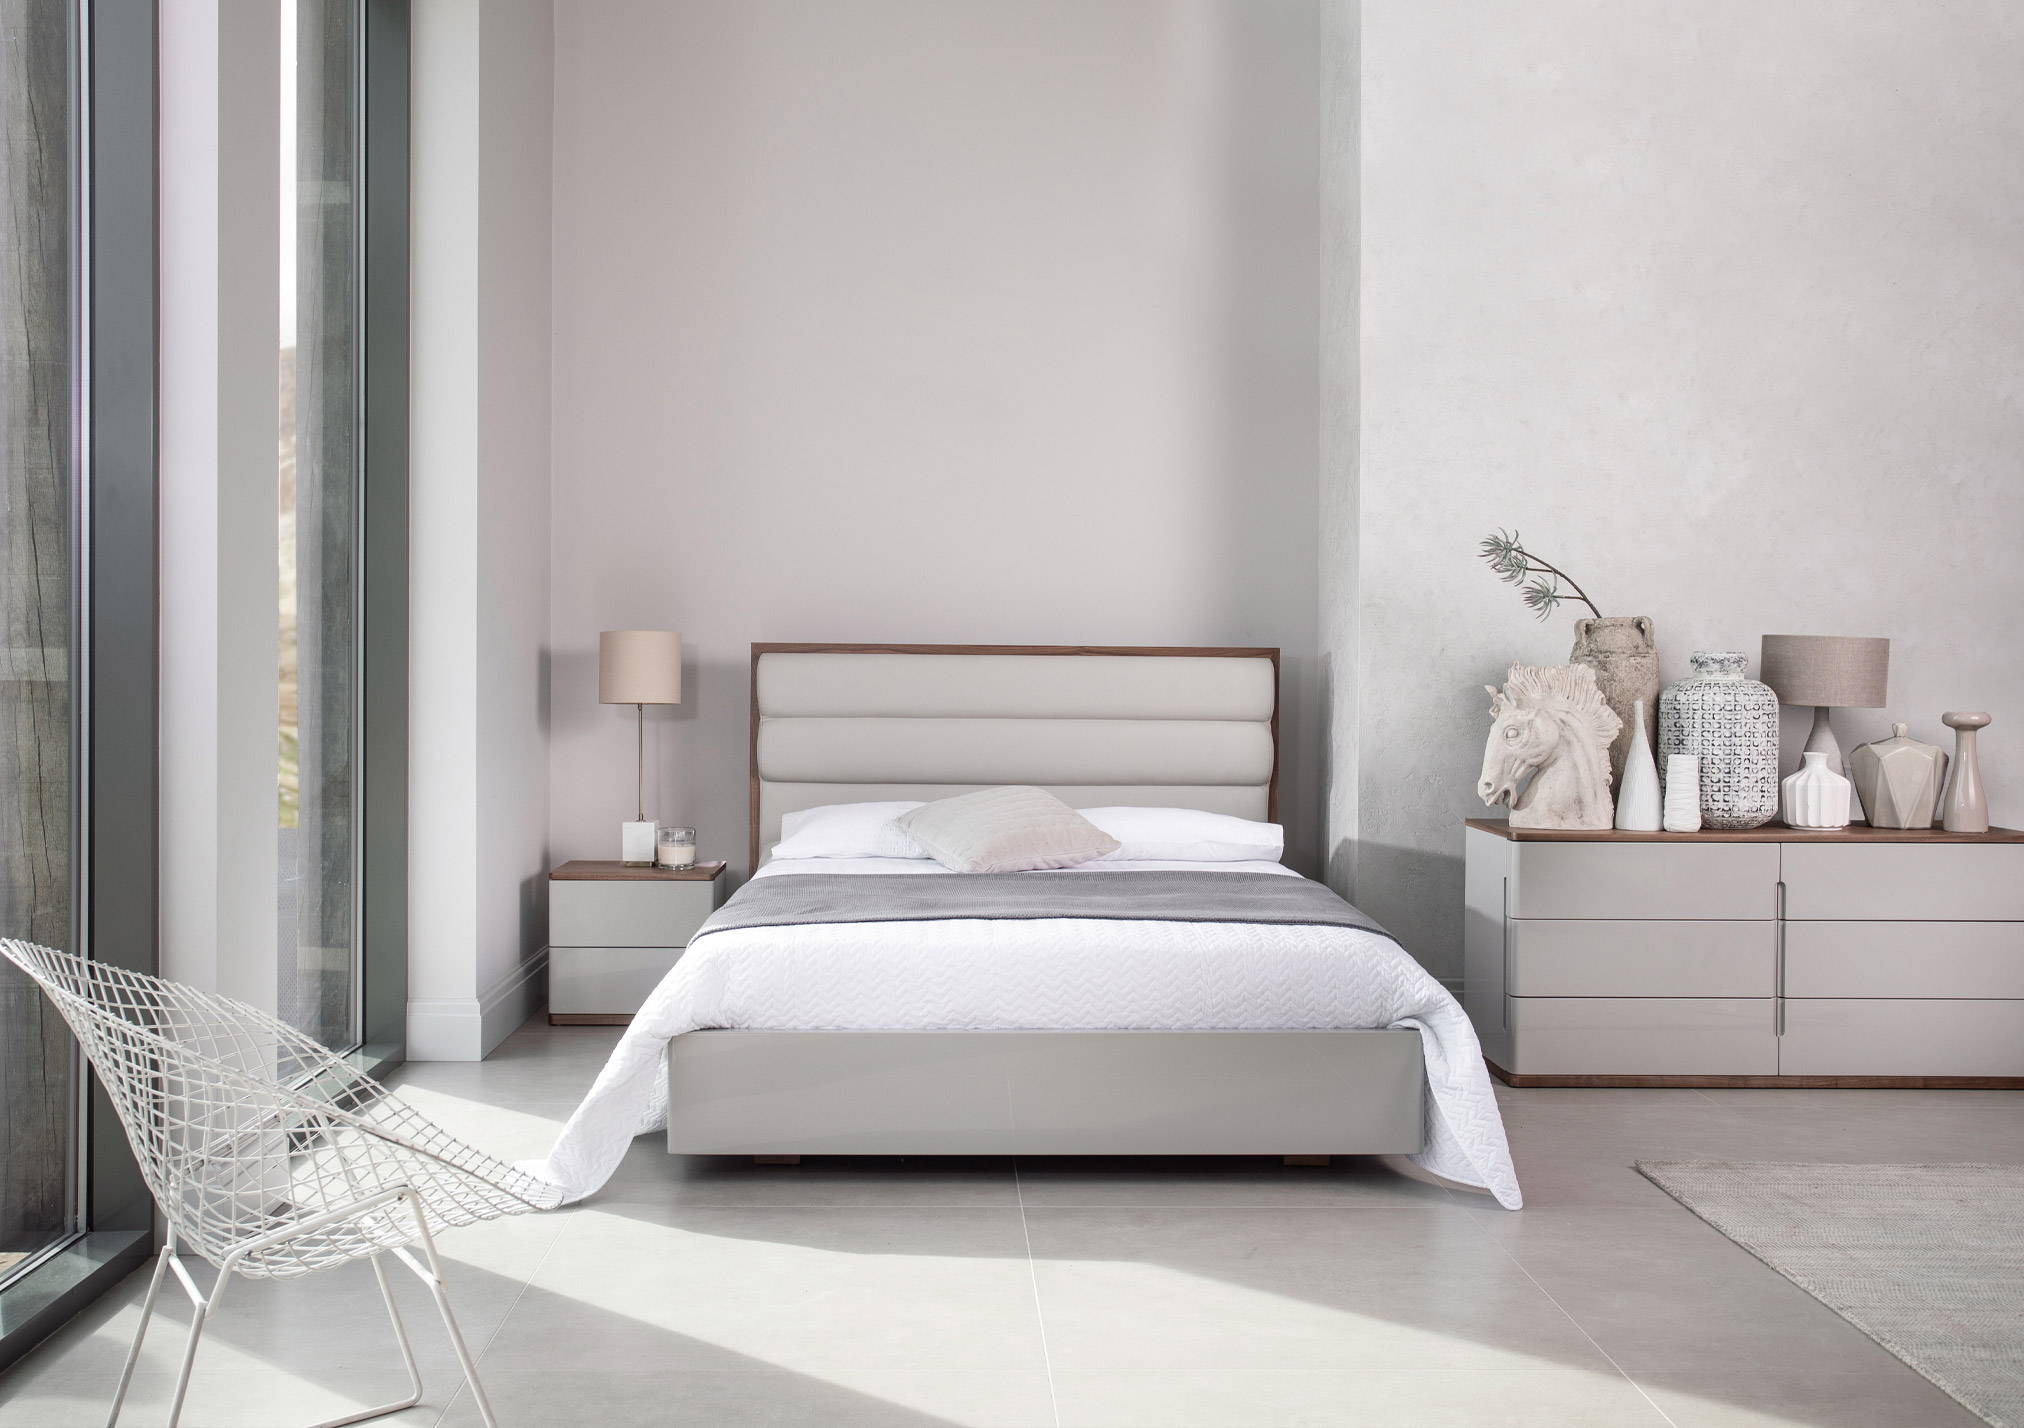 Crofton Park Bedroom Collection - White Painted Bedroom Contemporary Collection